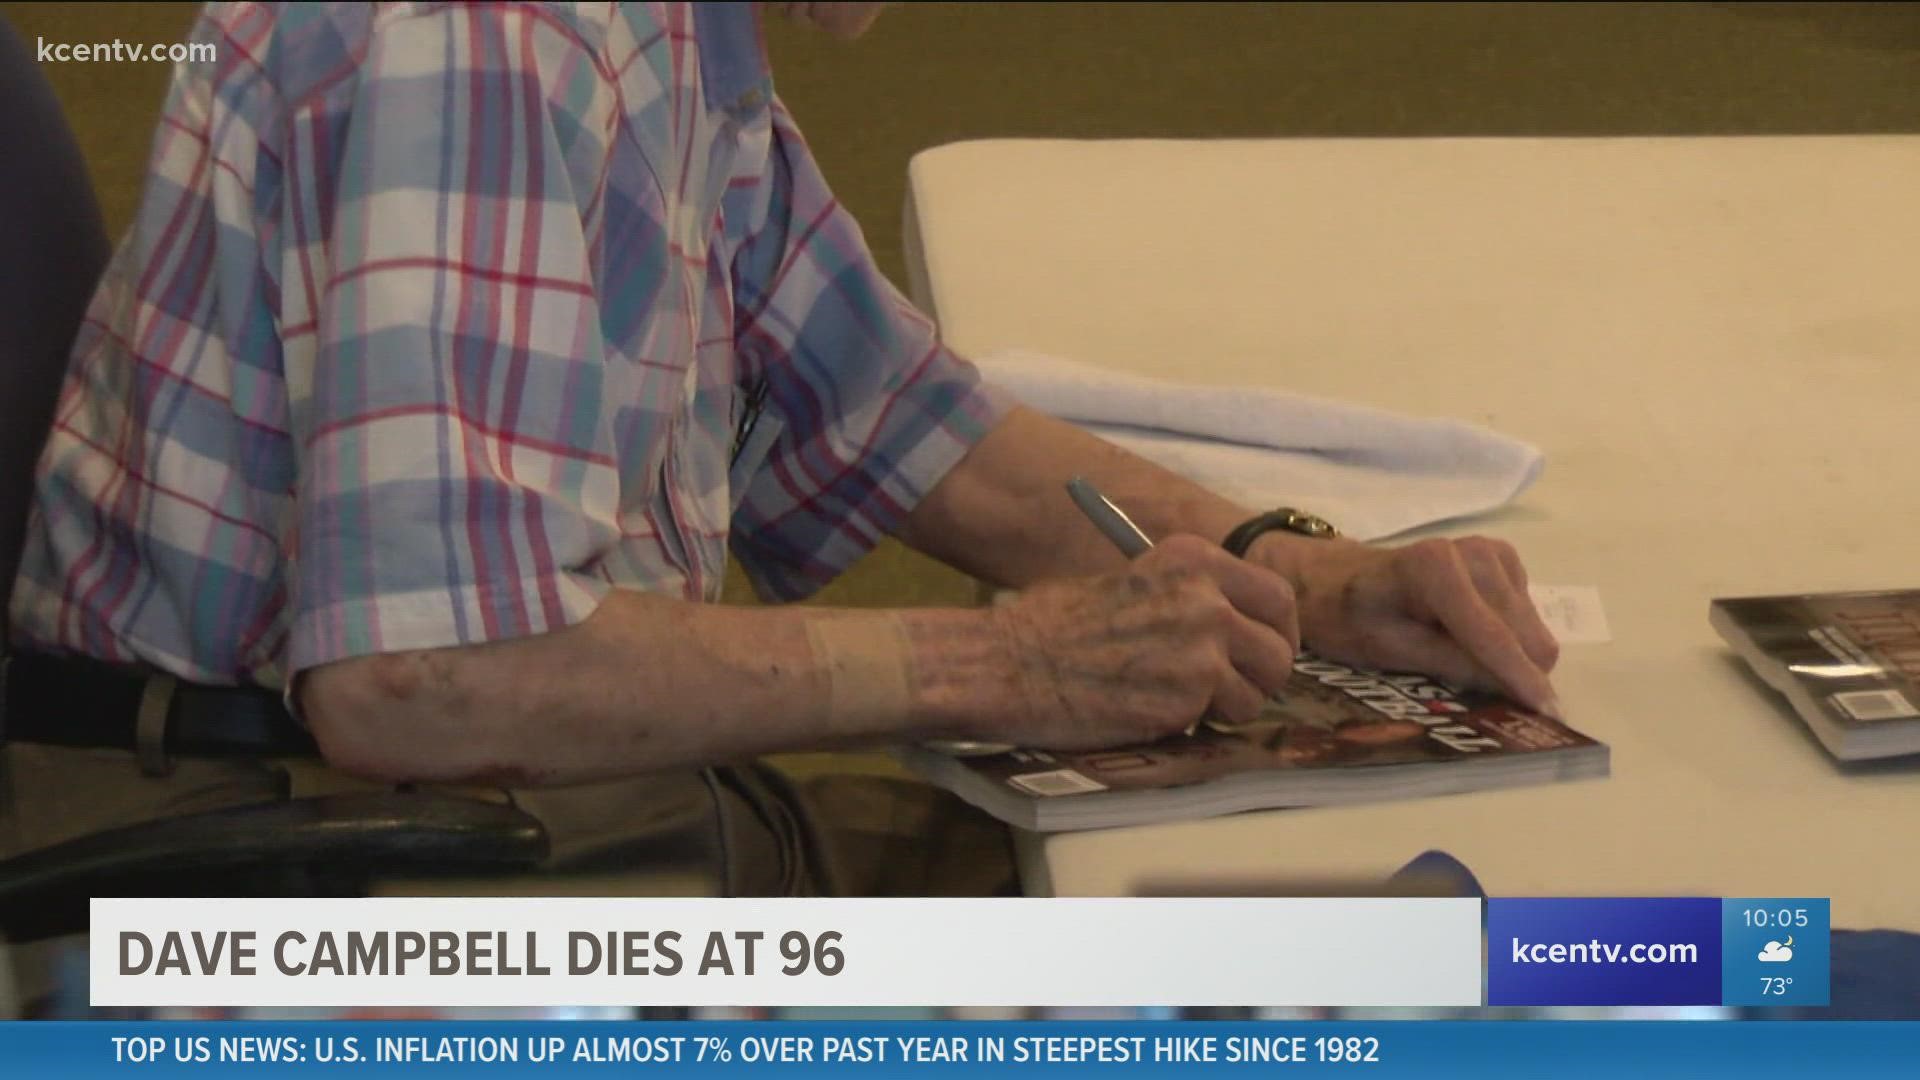 Sports journalist, magazine founder Dave Campbell dead at 96.